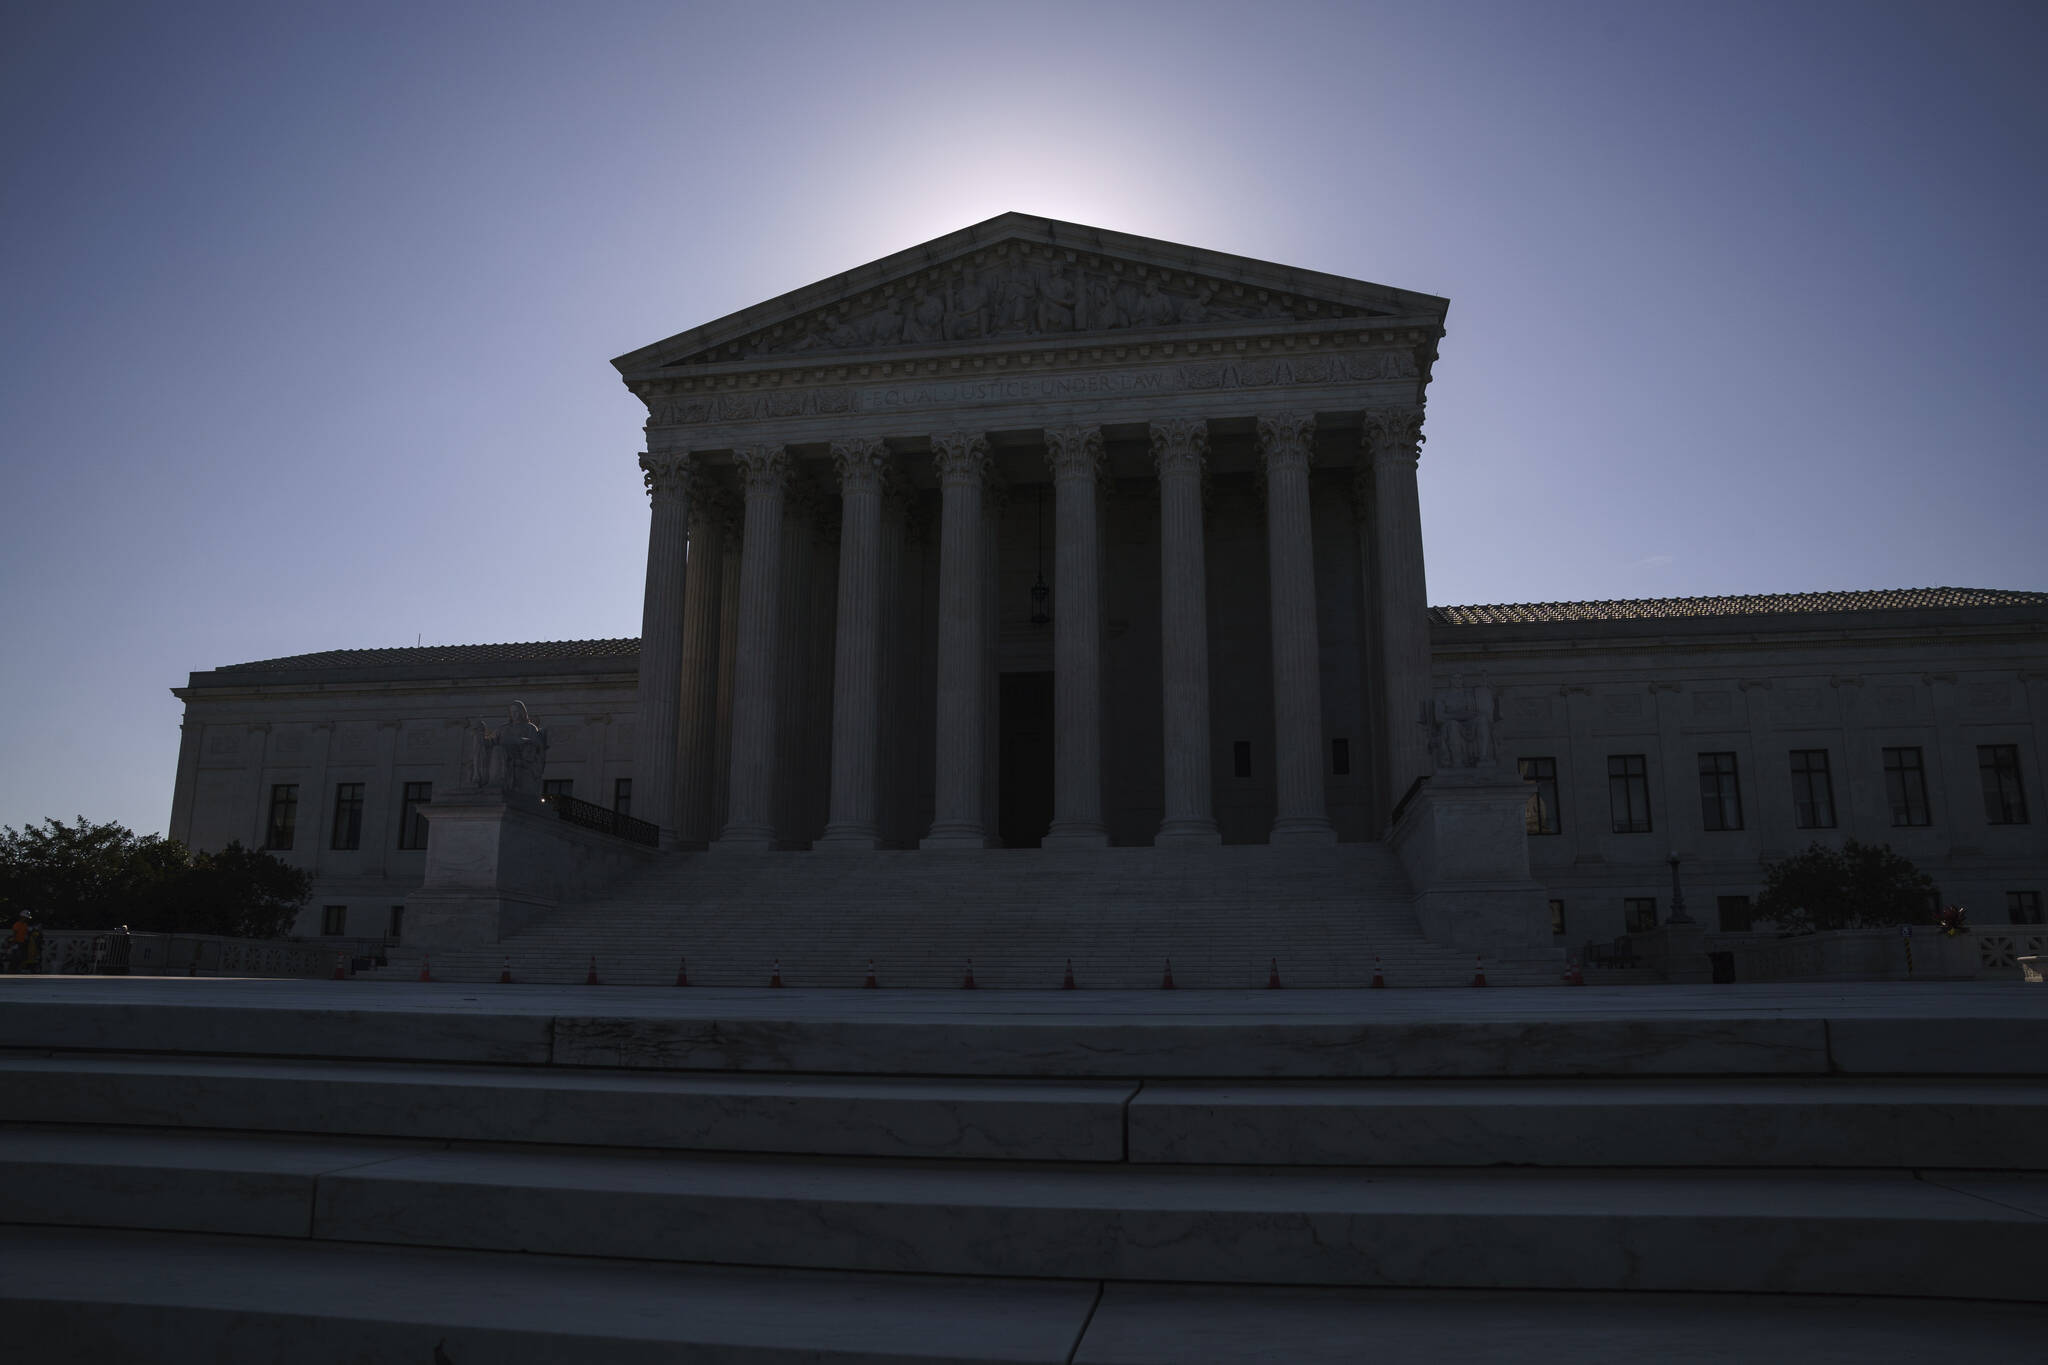 This photo shows the U.S. Supreme Court on Capitol Hill in Washington. Traditionally, the process of getting an opinion from the U.S. Supreme Court takes months and those rulings are often narrowly tailored. Emergency orders, especially during the court’s summer break, revolve around specific issues, like individual death penalty cases. But that pattern has changed in recent years with decisions coming outside the court’s normal procedures. (AP Photo / J. Scott Applewhite)